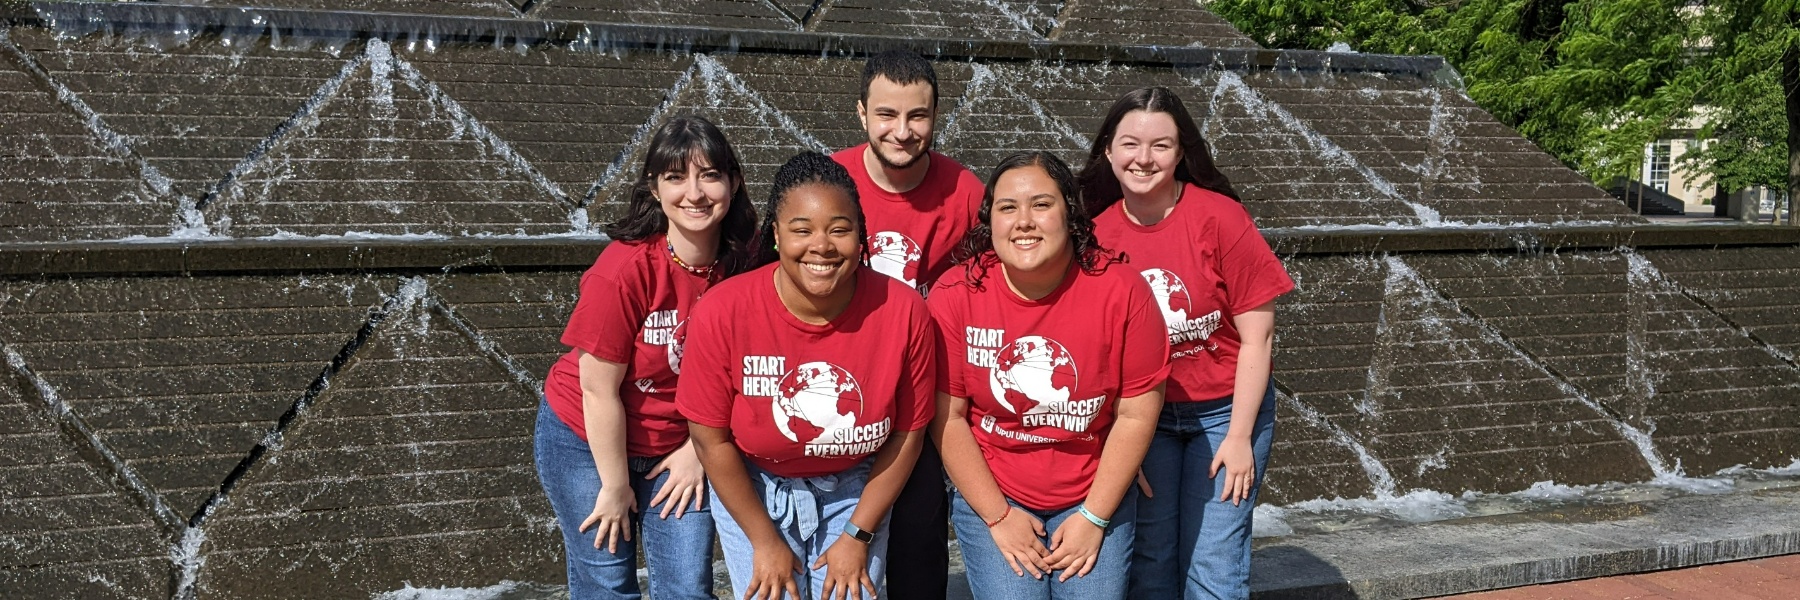 Photograph of the 5 peer advisors in front of the Wood fountain at IUPUI